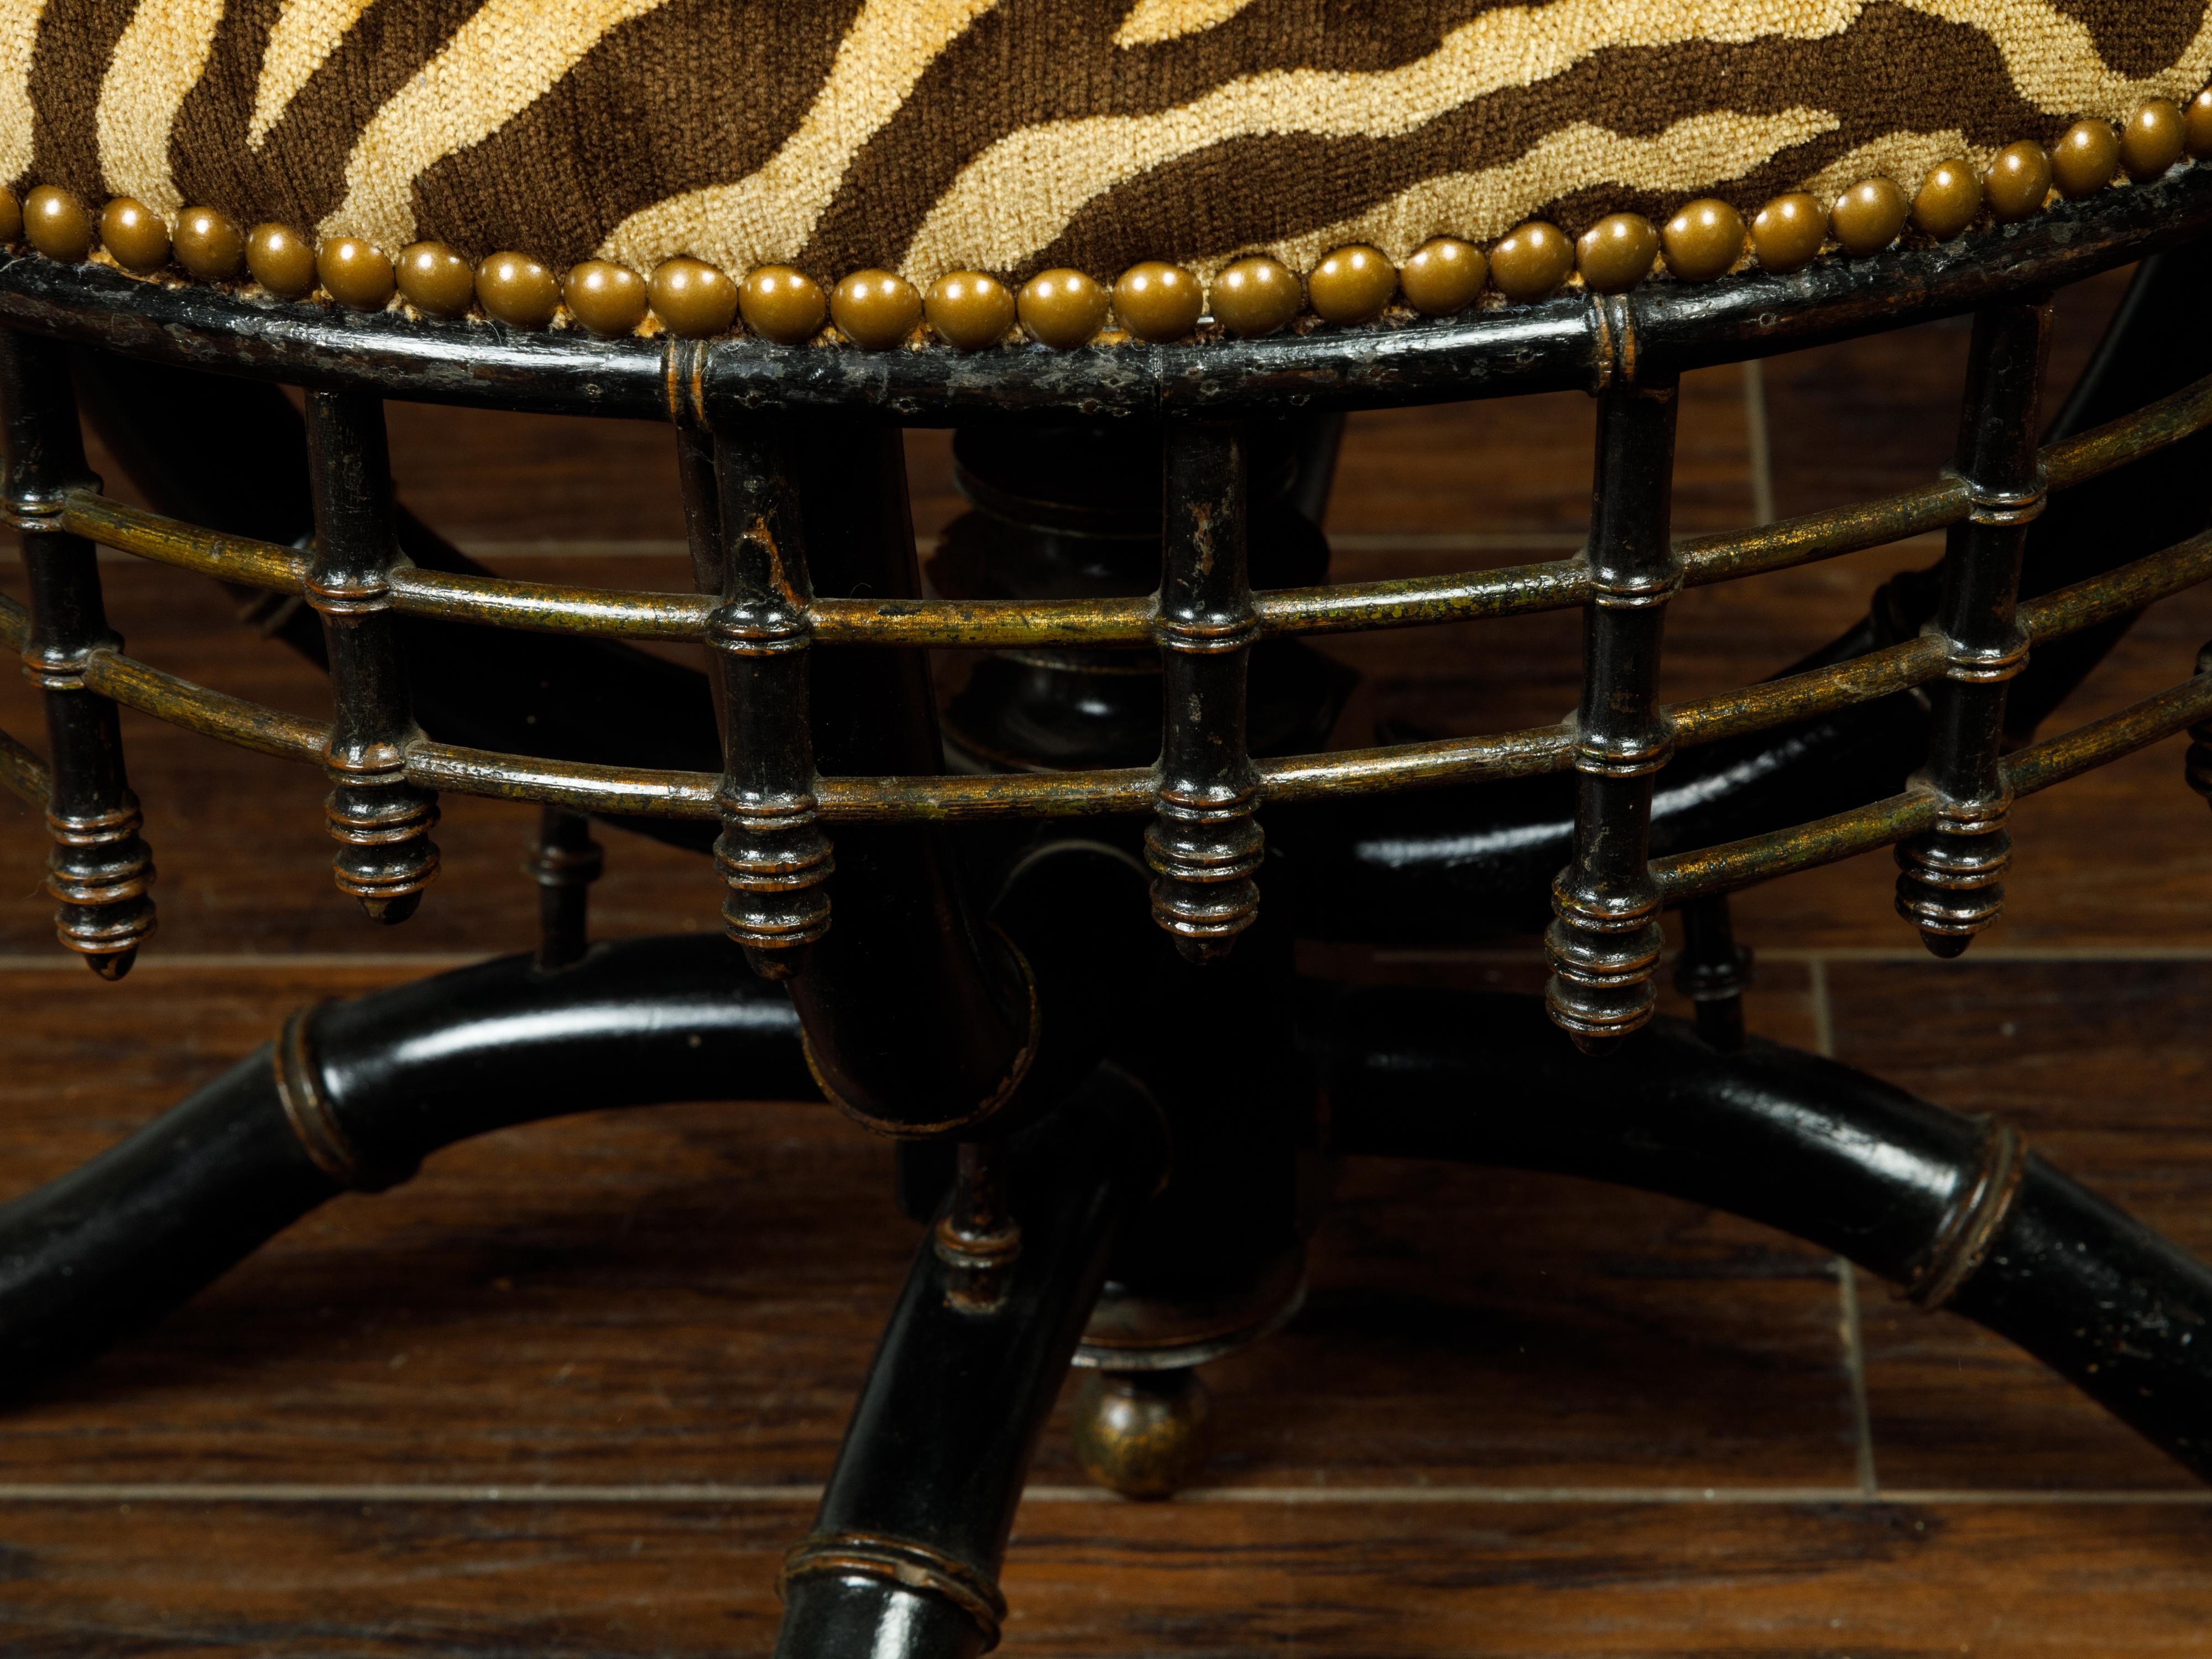 An English ebonized faux bamboo stool from the late 19th century, with tiger upholstery. Created in England during the last decade of the 19th century, this stool features a circular seat recovered with a tiger striped upholstery. The stool is